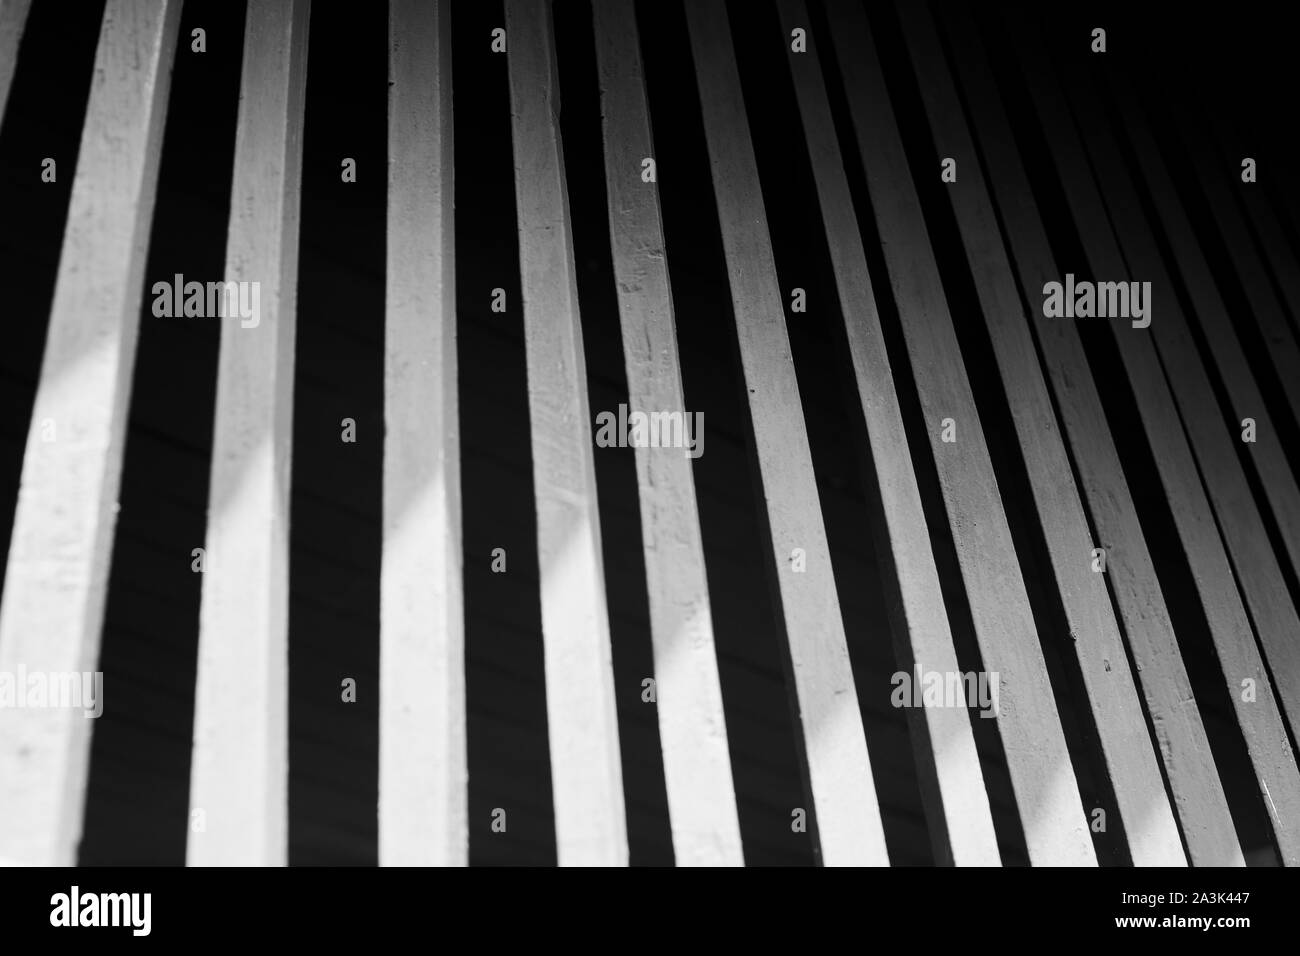 black and white art photography shadow of pattern interior line contrast light and shade of wooden windows. Stock Photo